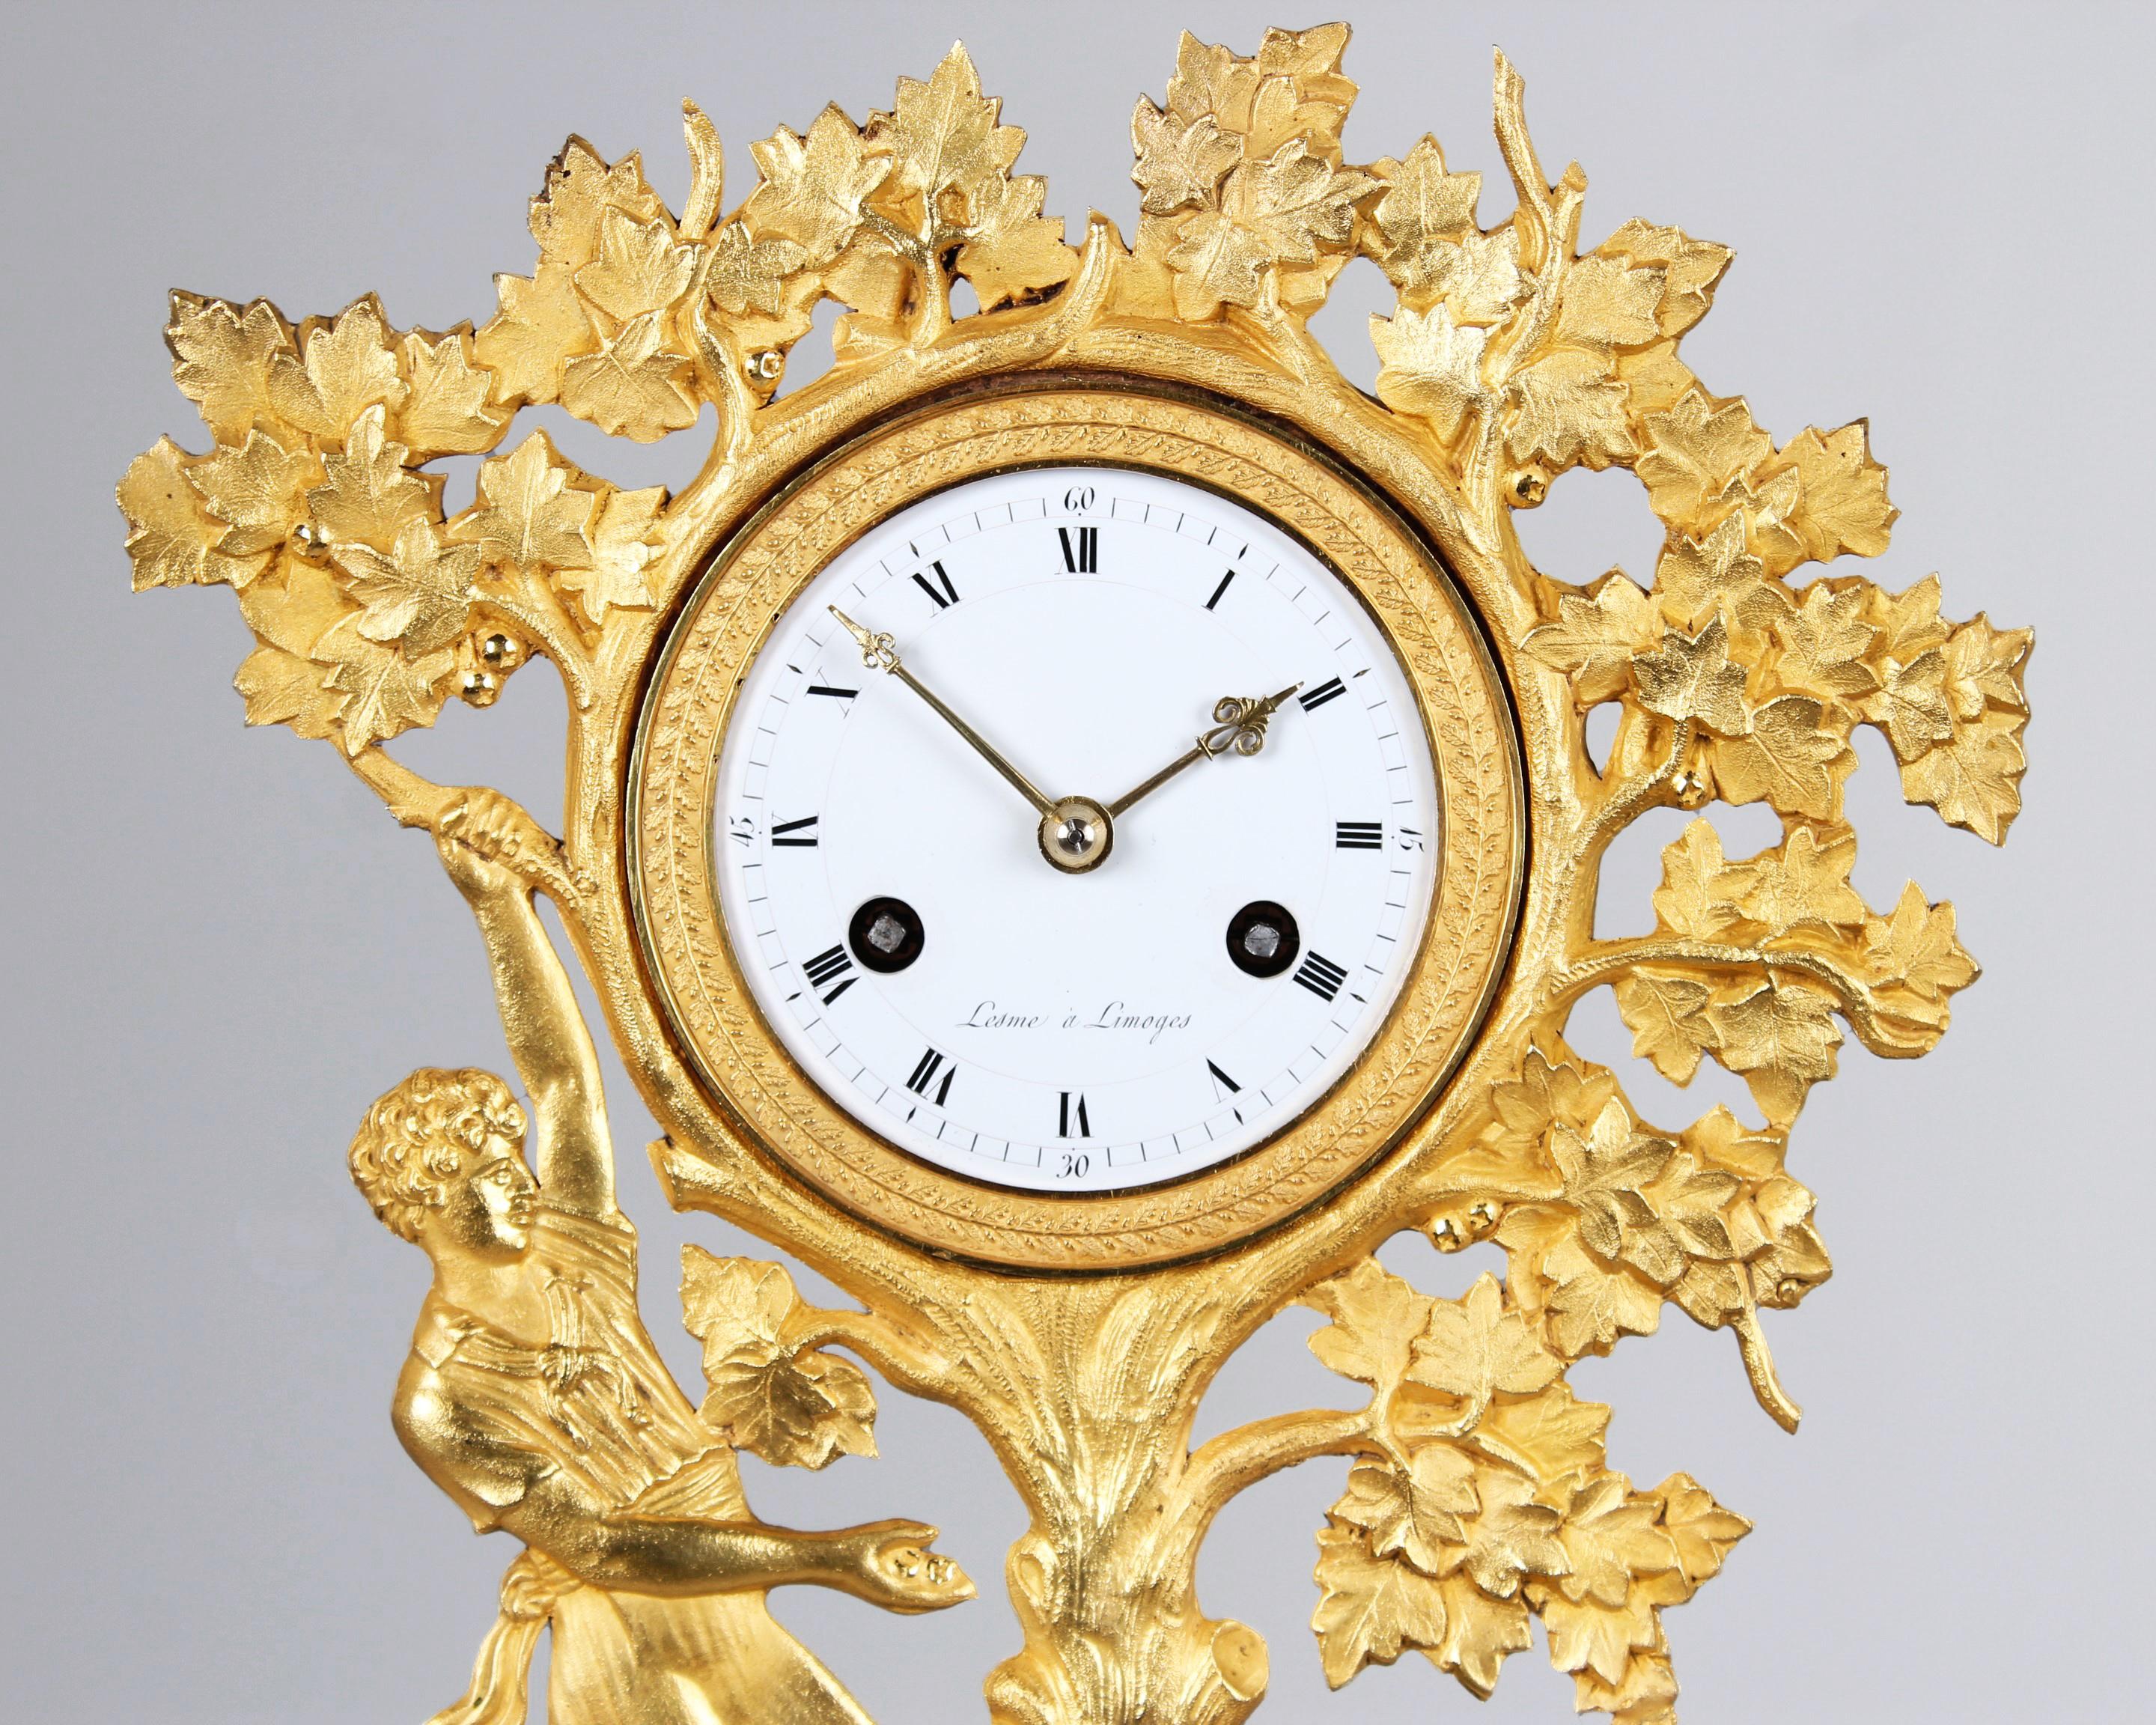 19th Century French mantel clock

France (Limoges)
Ormolu
around 1840

Dimensions: H x W x D: 37 x 22 x 10 cm

Description:
The bronze, cast in relief and then fire-gilded, stands on a black marble base supported by bell feet.
It depicts a couple